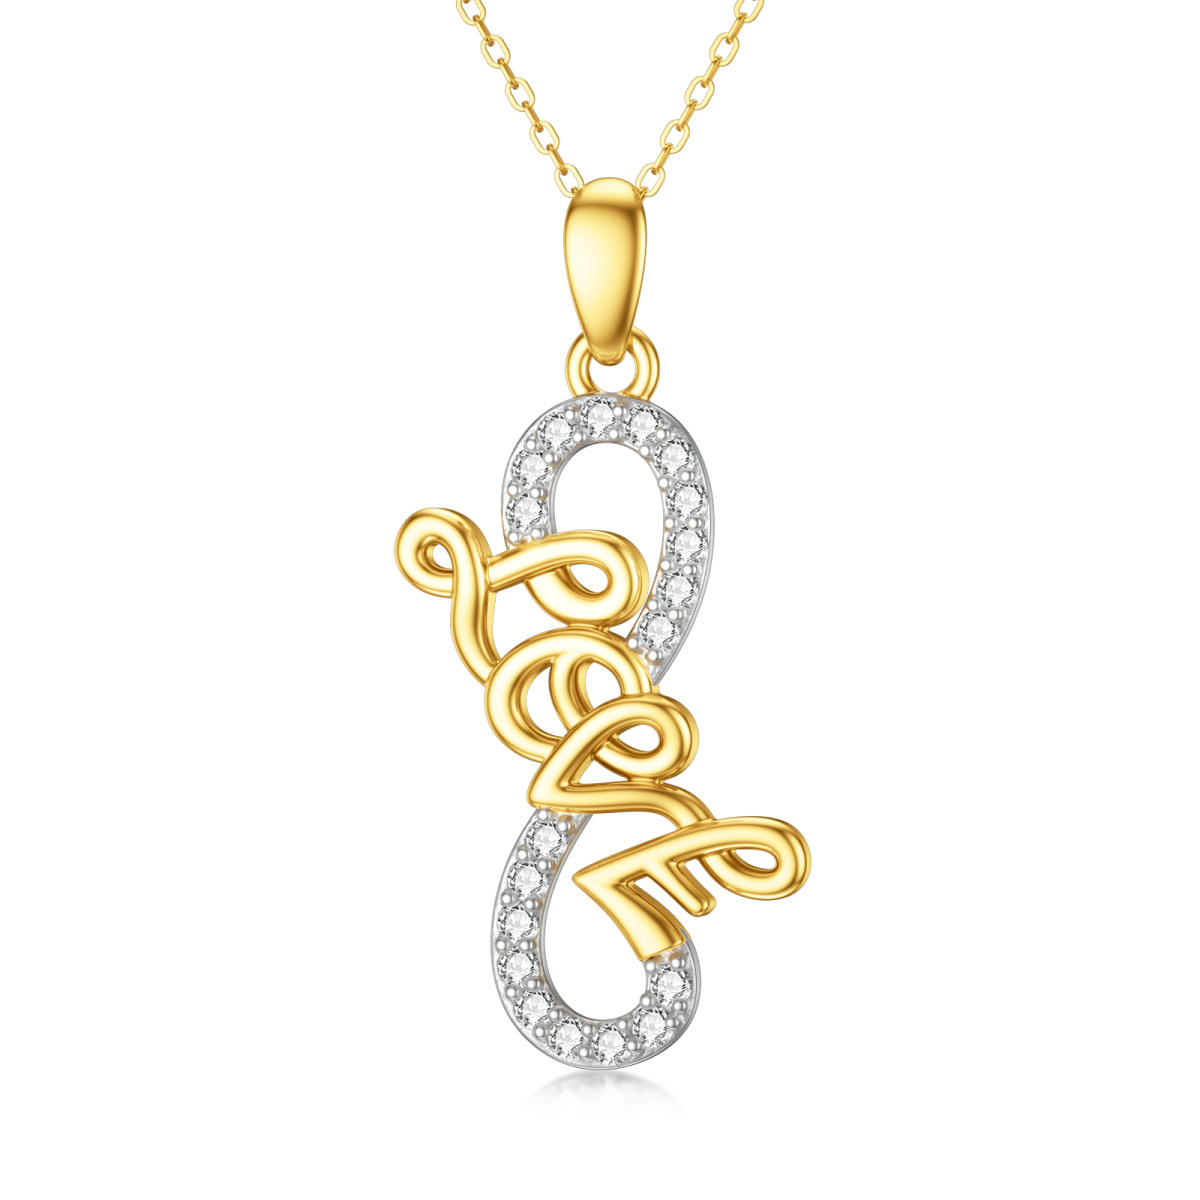 14K Silver & Gold Cubic Zirconia Infinite Symbol Pendant Necklace with Engraved Word-1